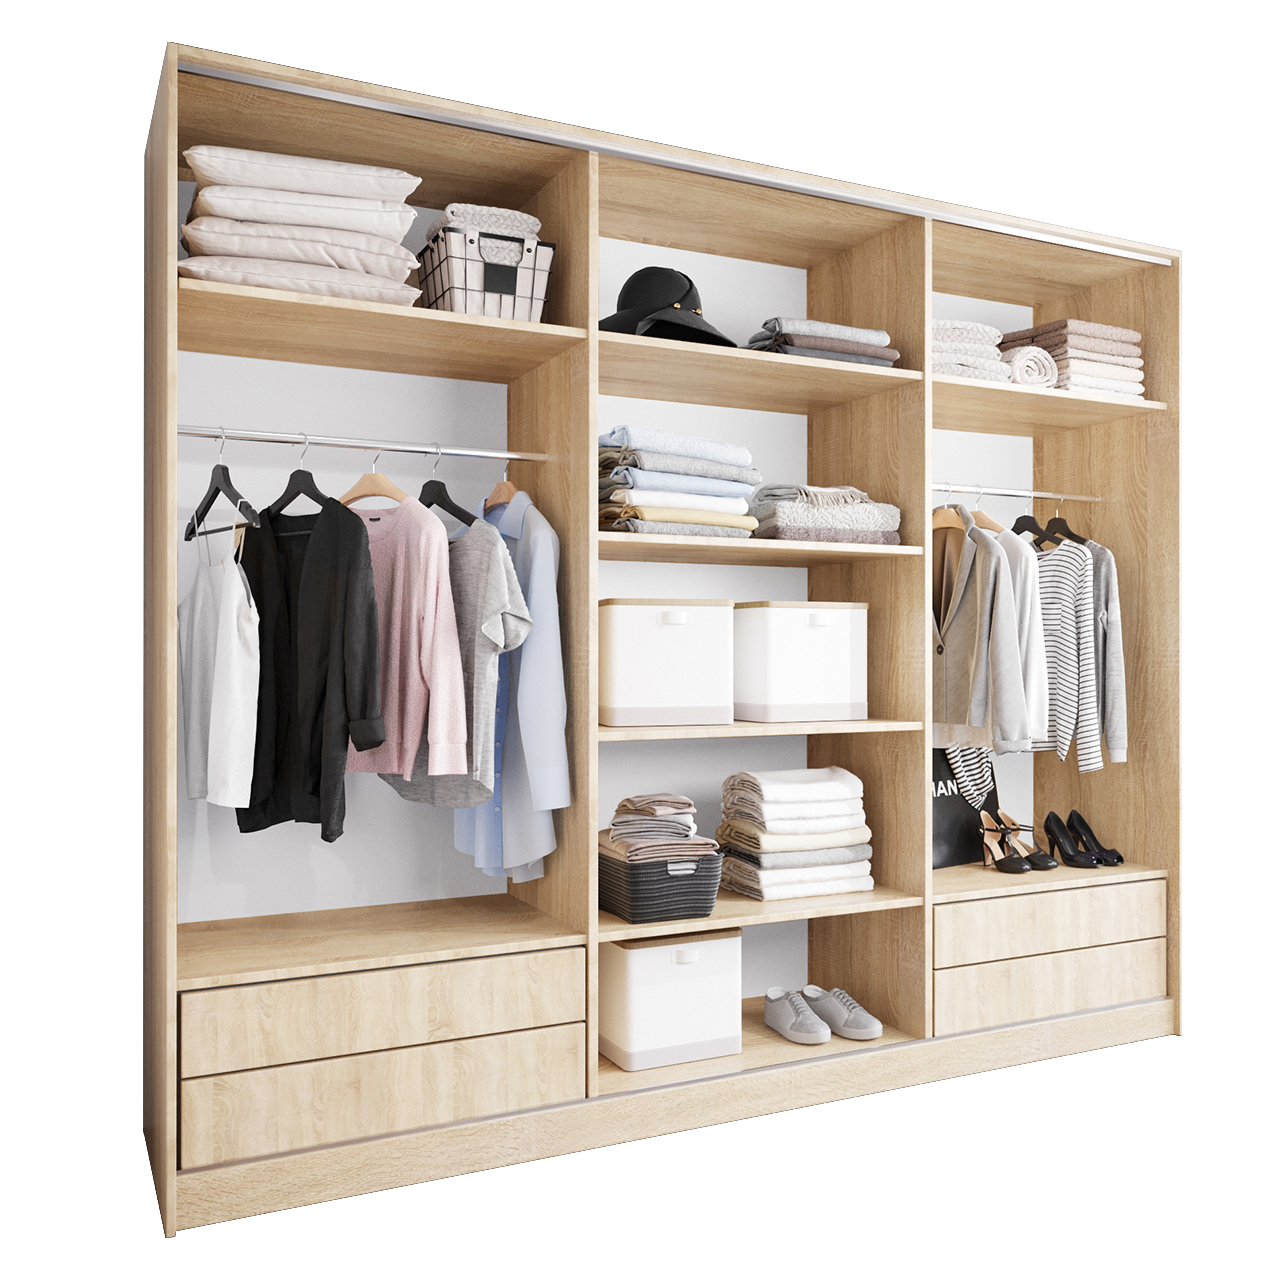 Sliding Wardrobe with Drawers BRITTO D 250 sonoma